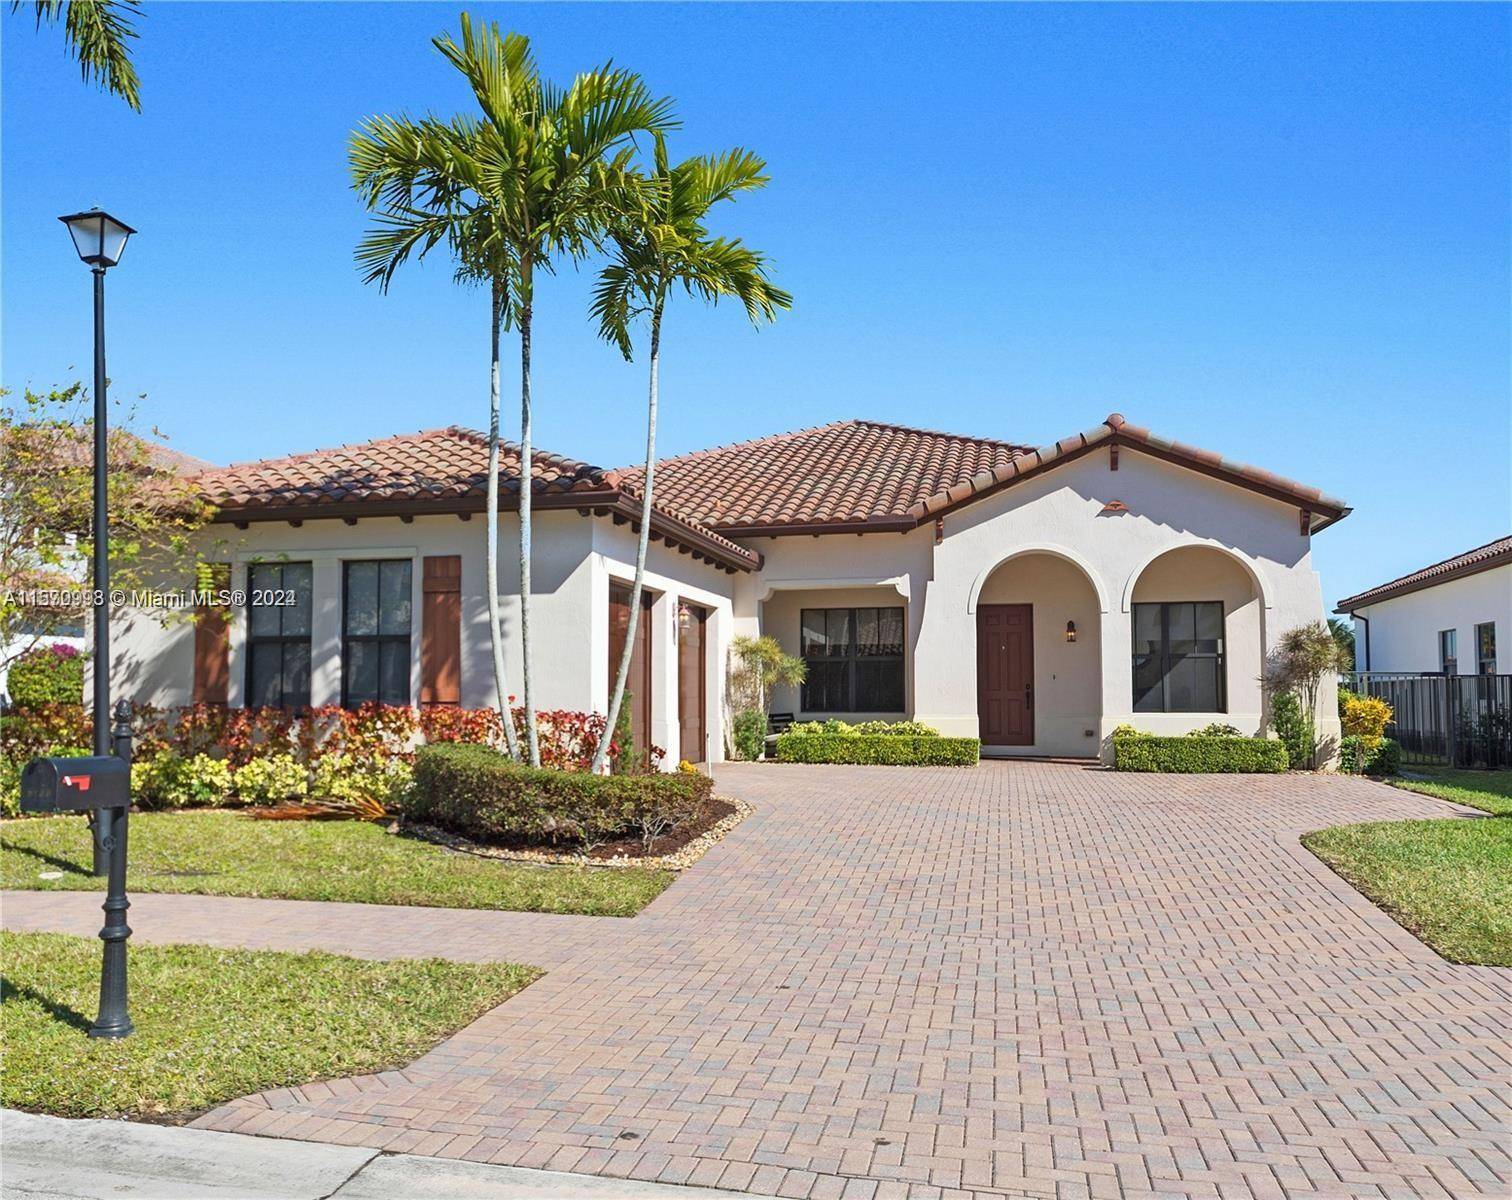 GREAT OPPORTUNITY IN COOPER CITY'S MOST DESIRABLE GATED COMMUNITY.